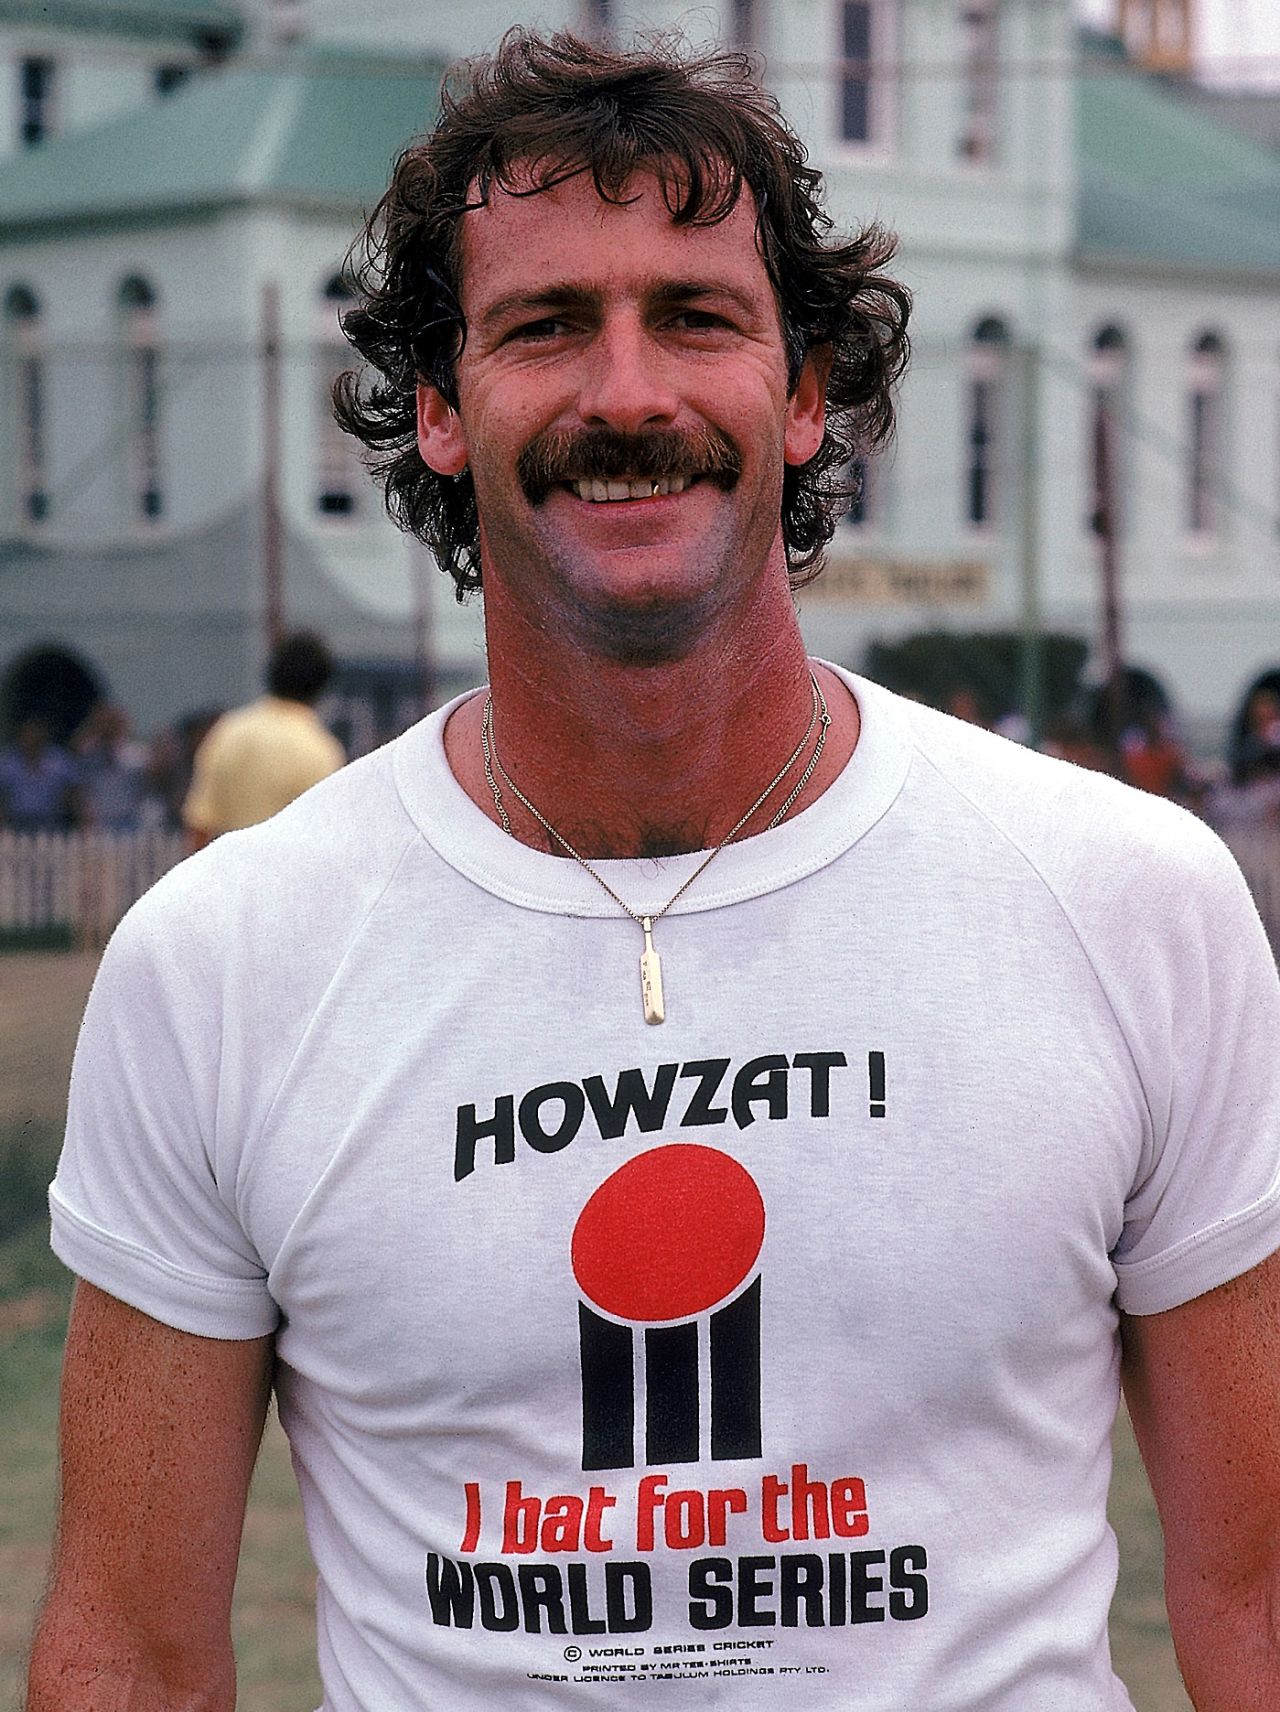 Dennis Lillee and his WSC t-shirt, Sydney, January 17, 1978